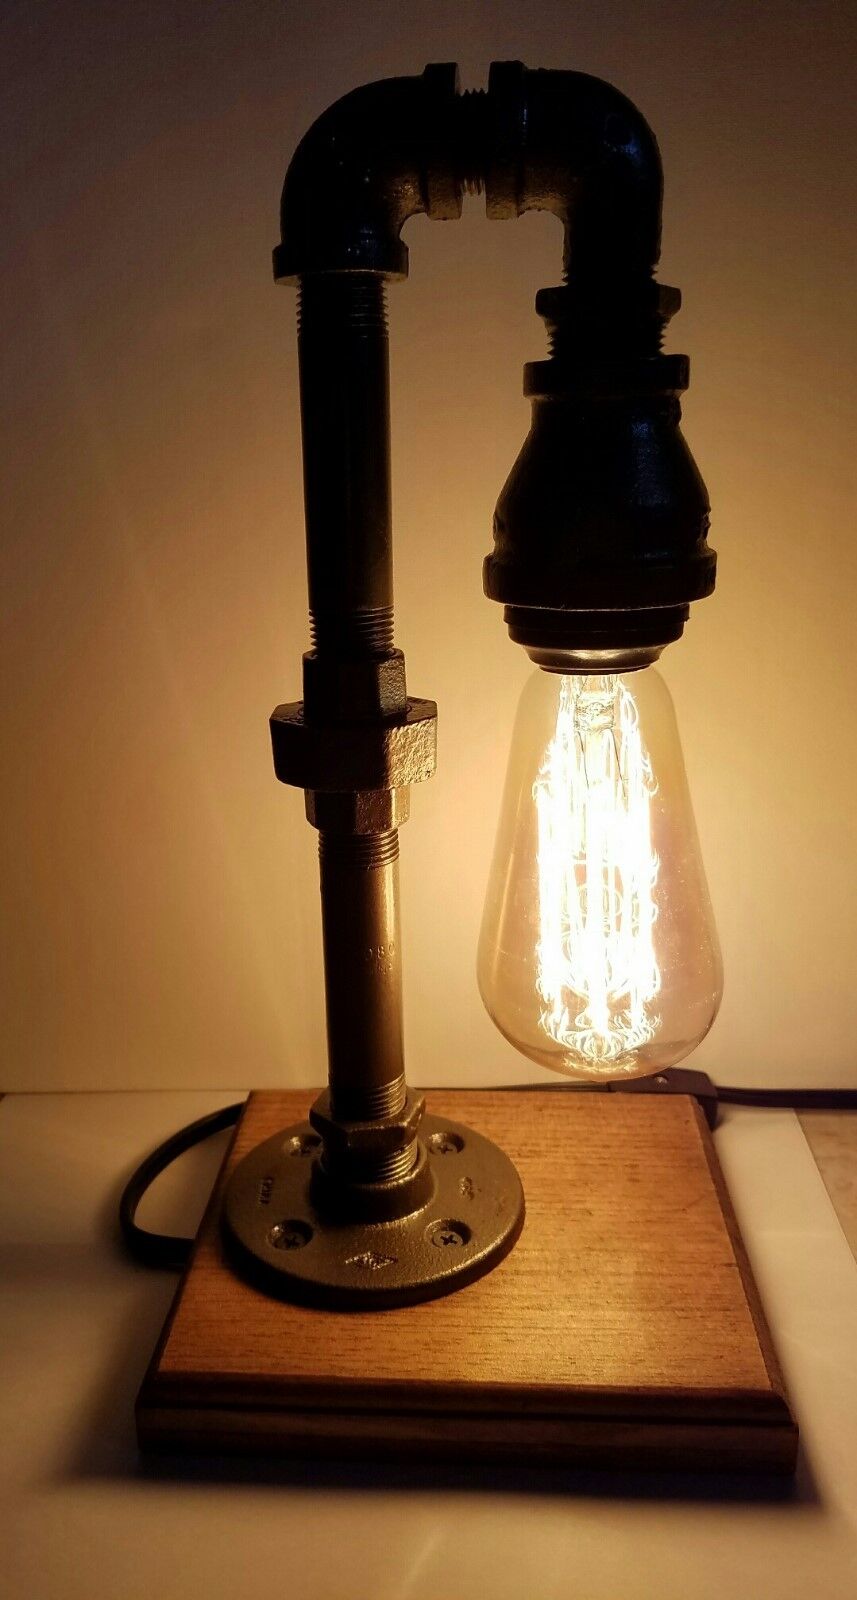 Retro Industrial Pipe Desk Lamp steampunk style with vintage edison bulb